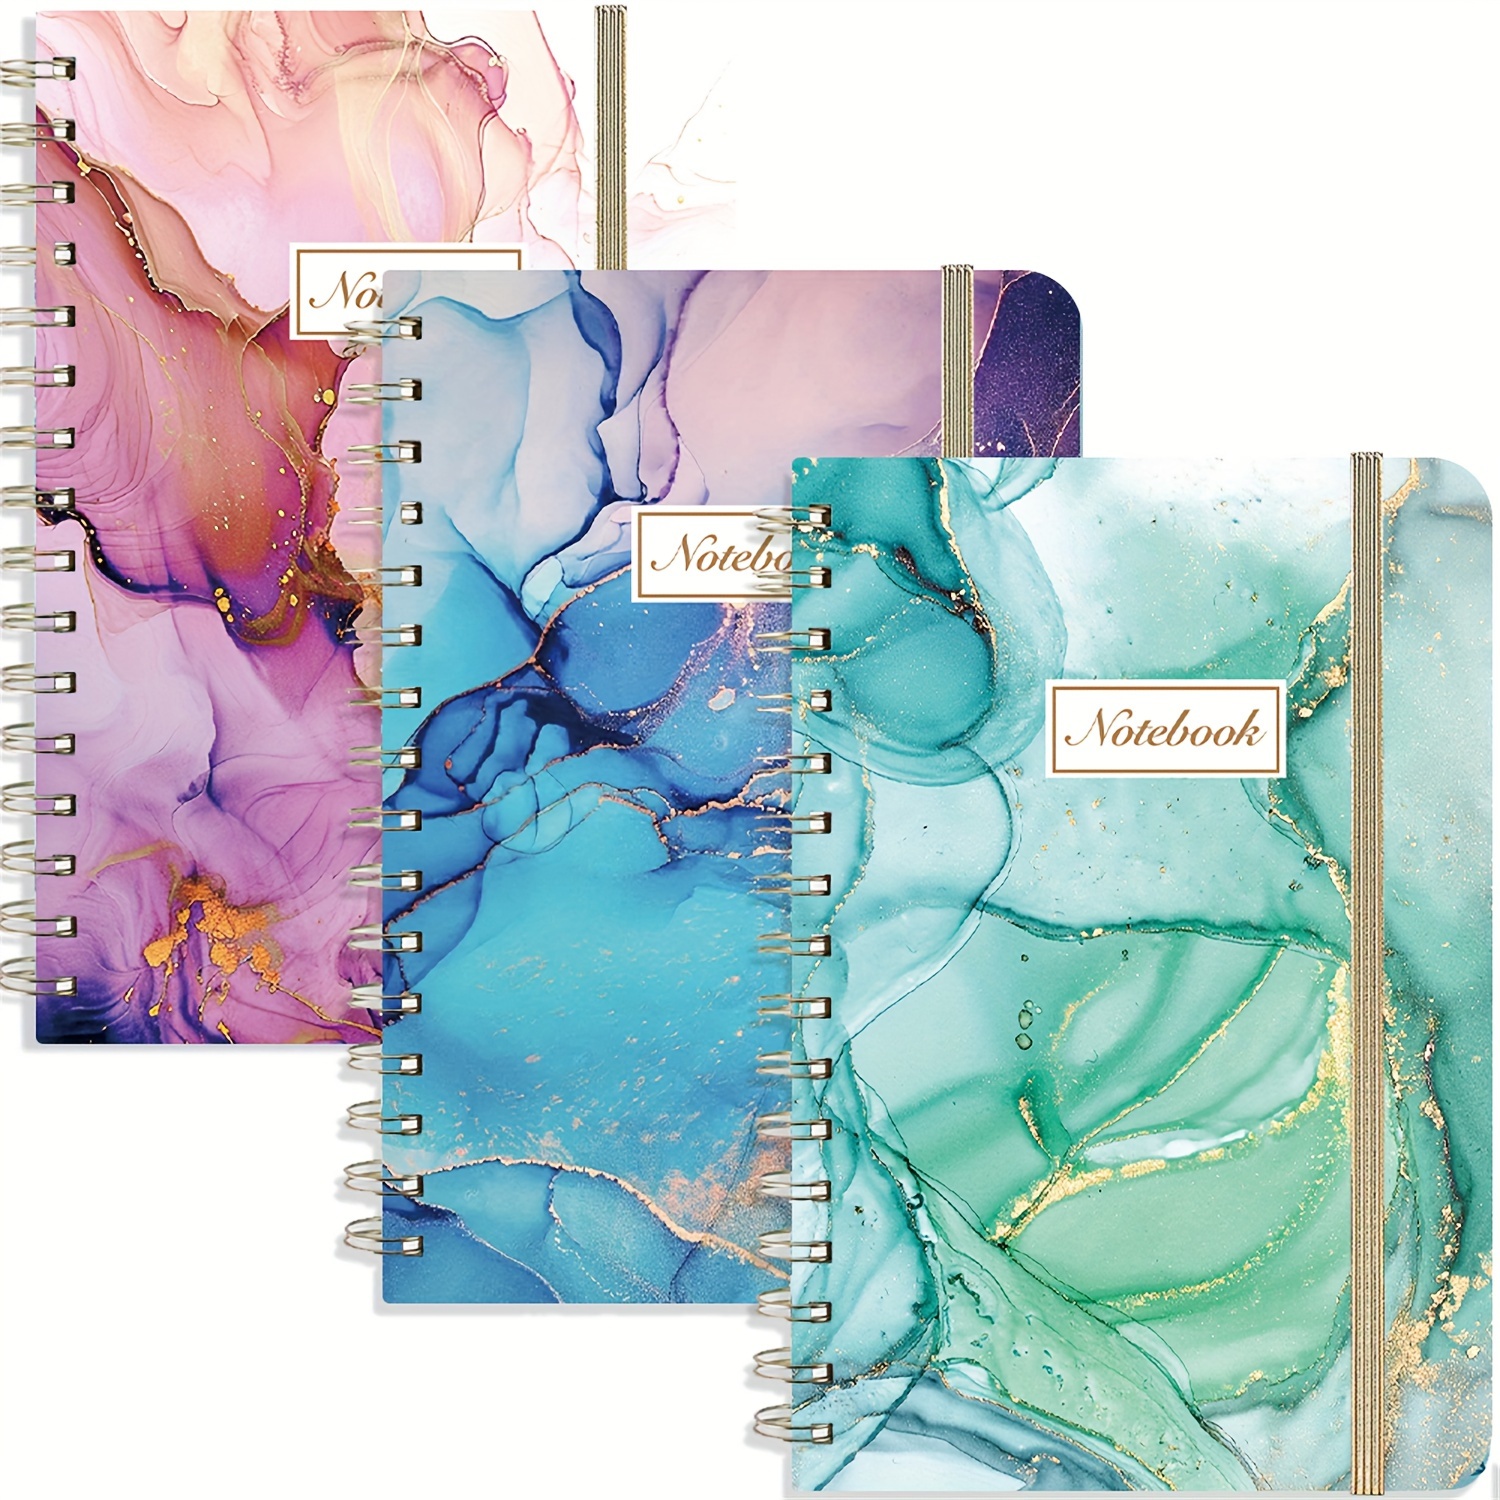 

3 Pack Hardcover Spiral Journal Notebook With Back Pocket, 160 Pages, 100gsm Paper - A5 Size, Gilded Design For Office, School, And Gift Supplies